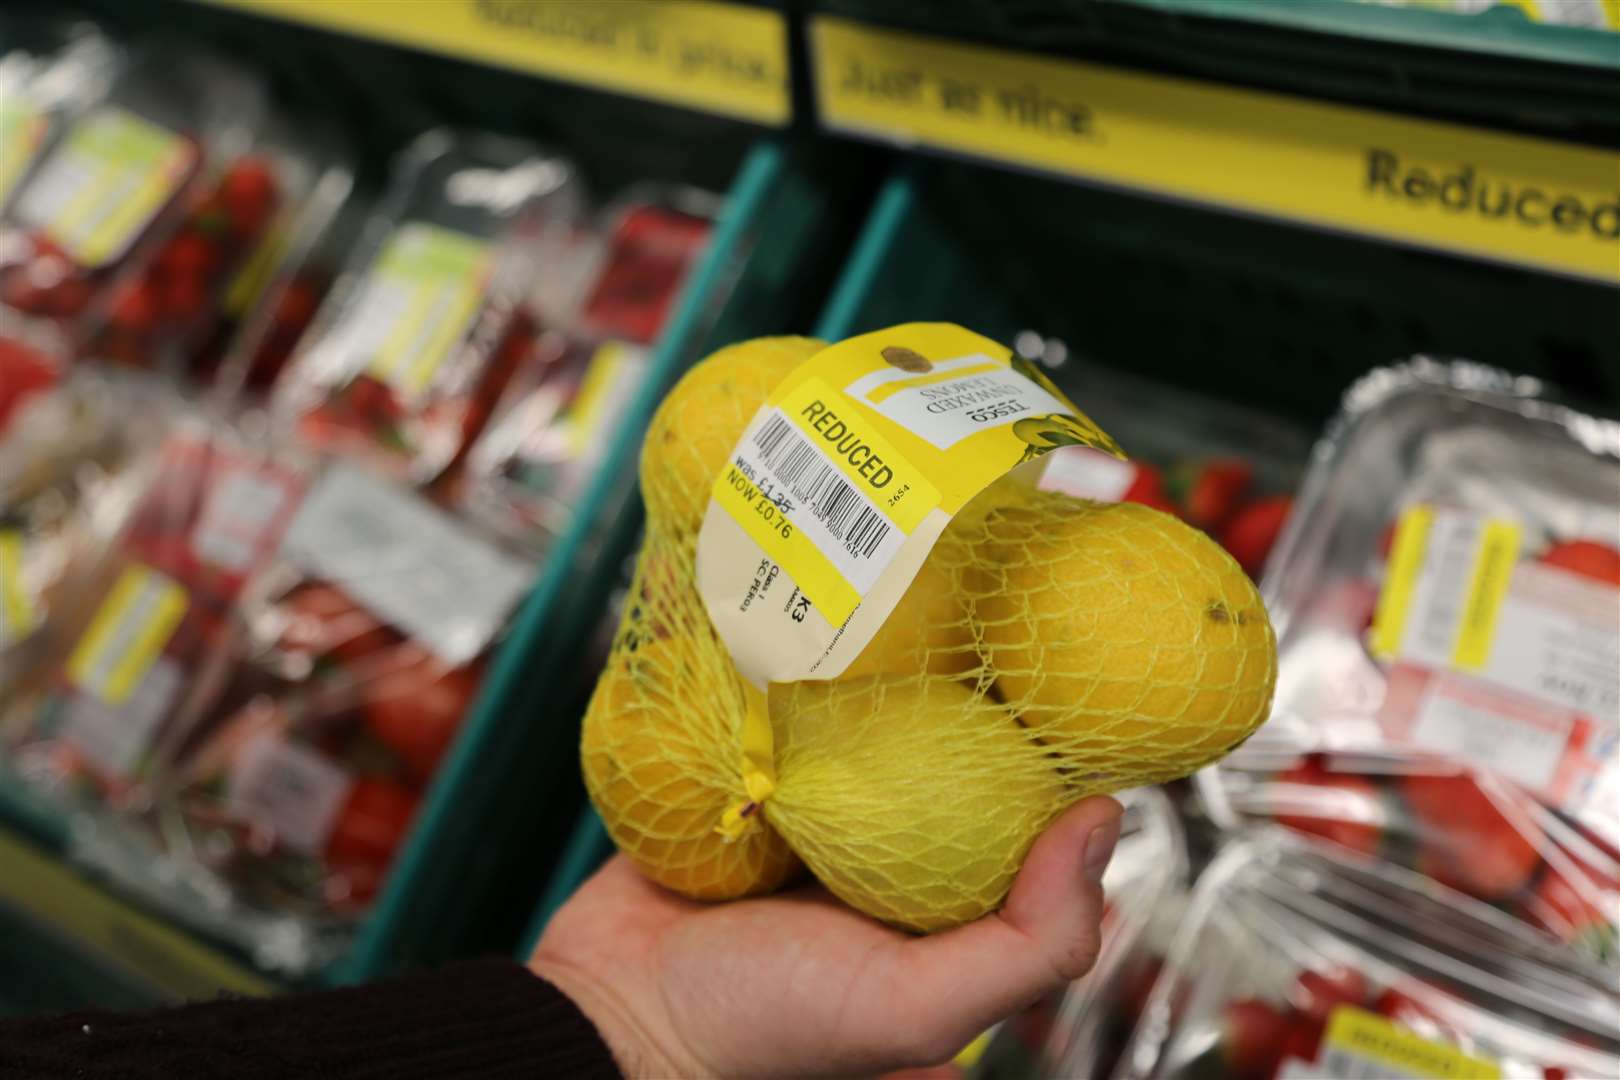 A ‘yellow-stickered’ product. (Tesco/PA)